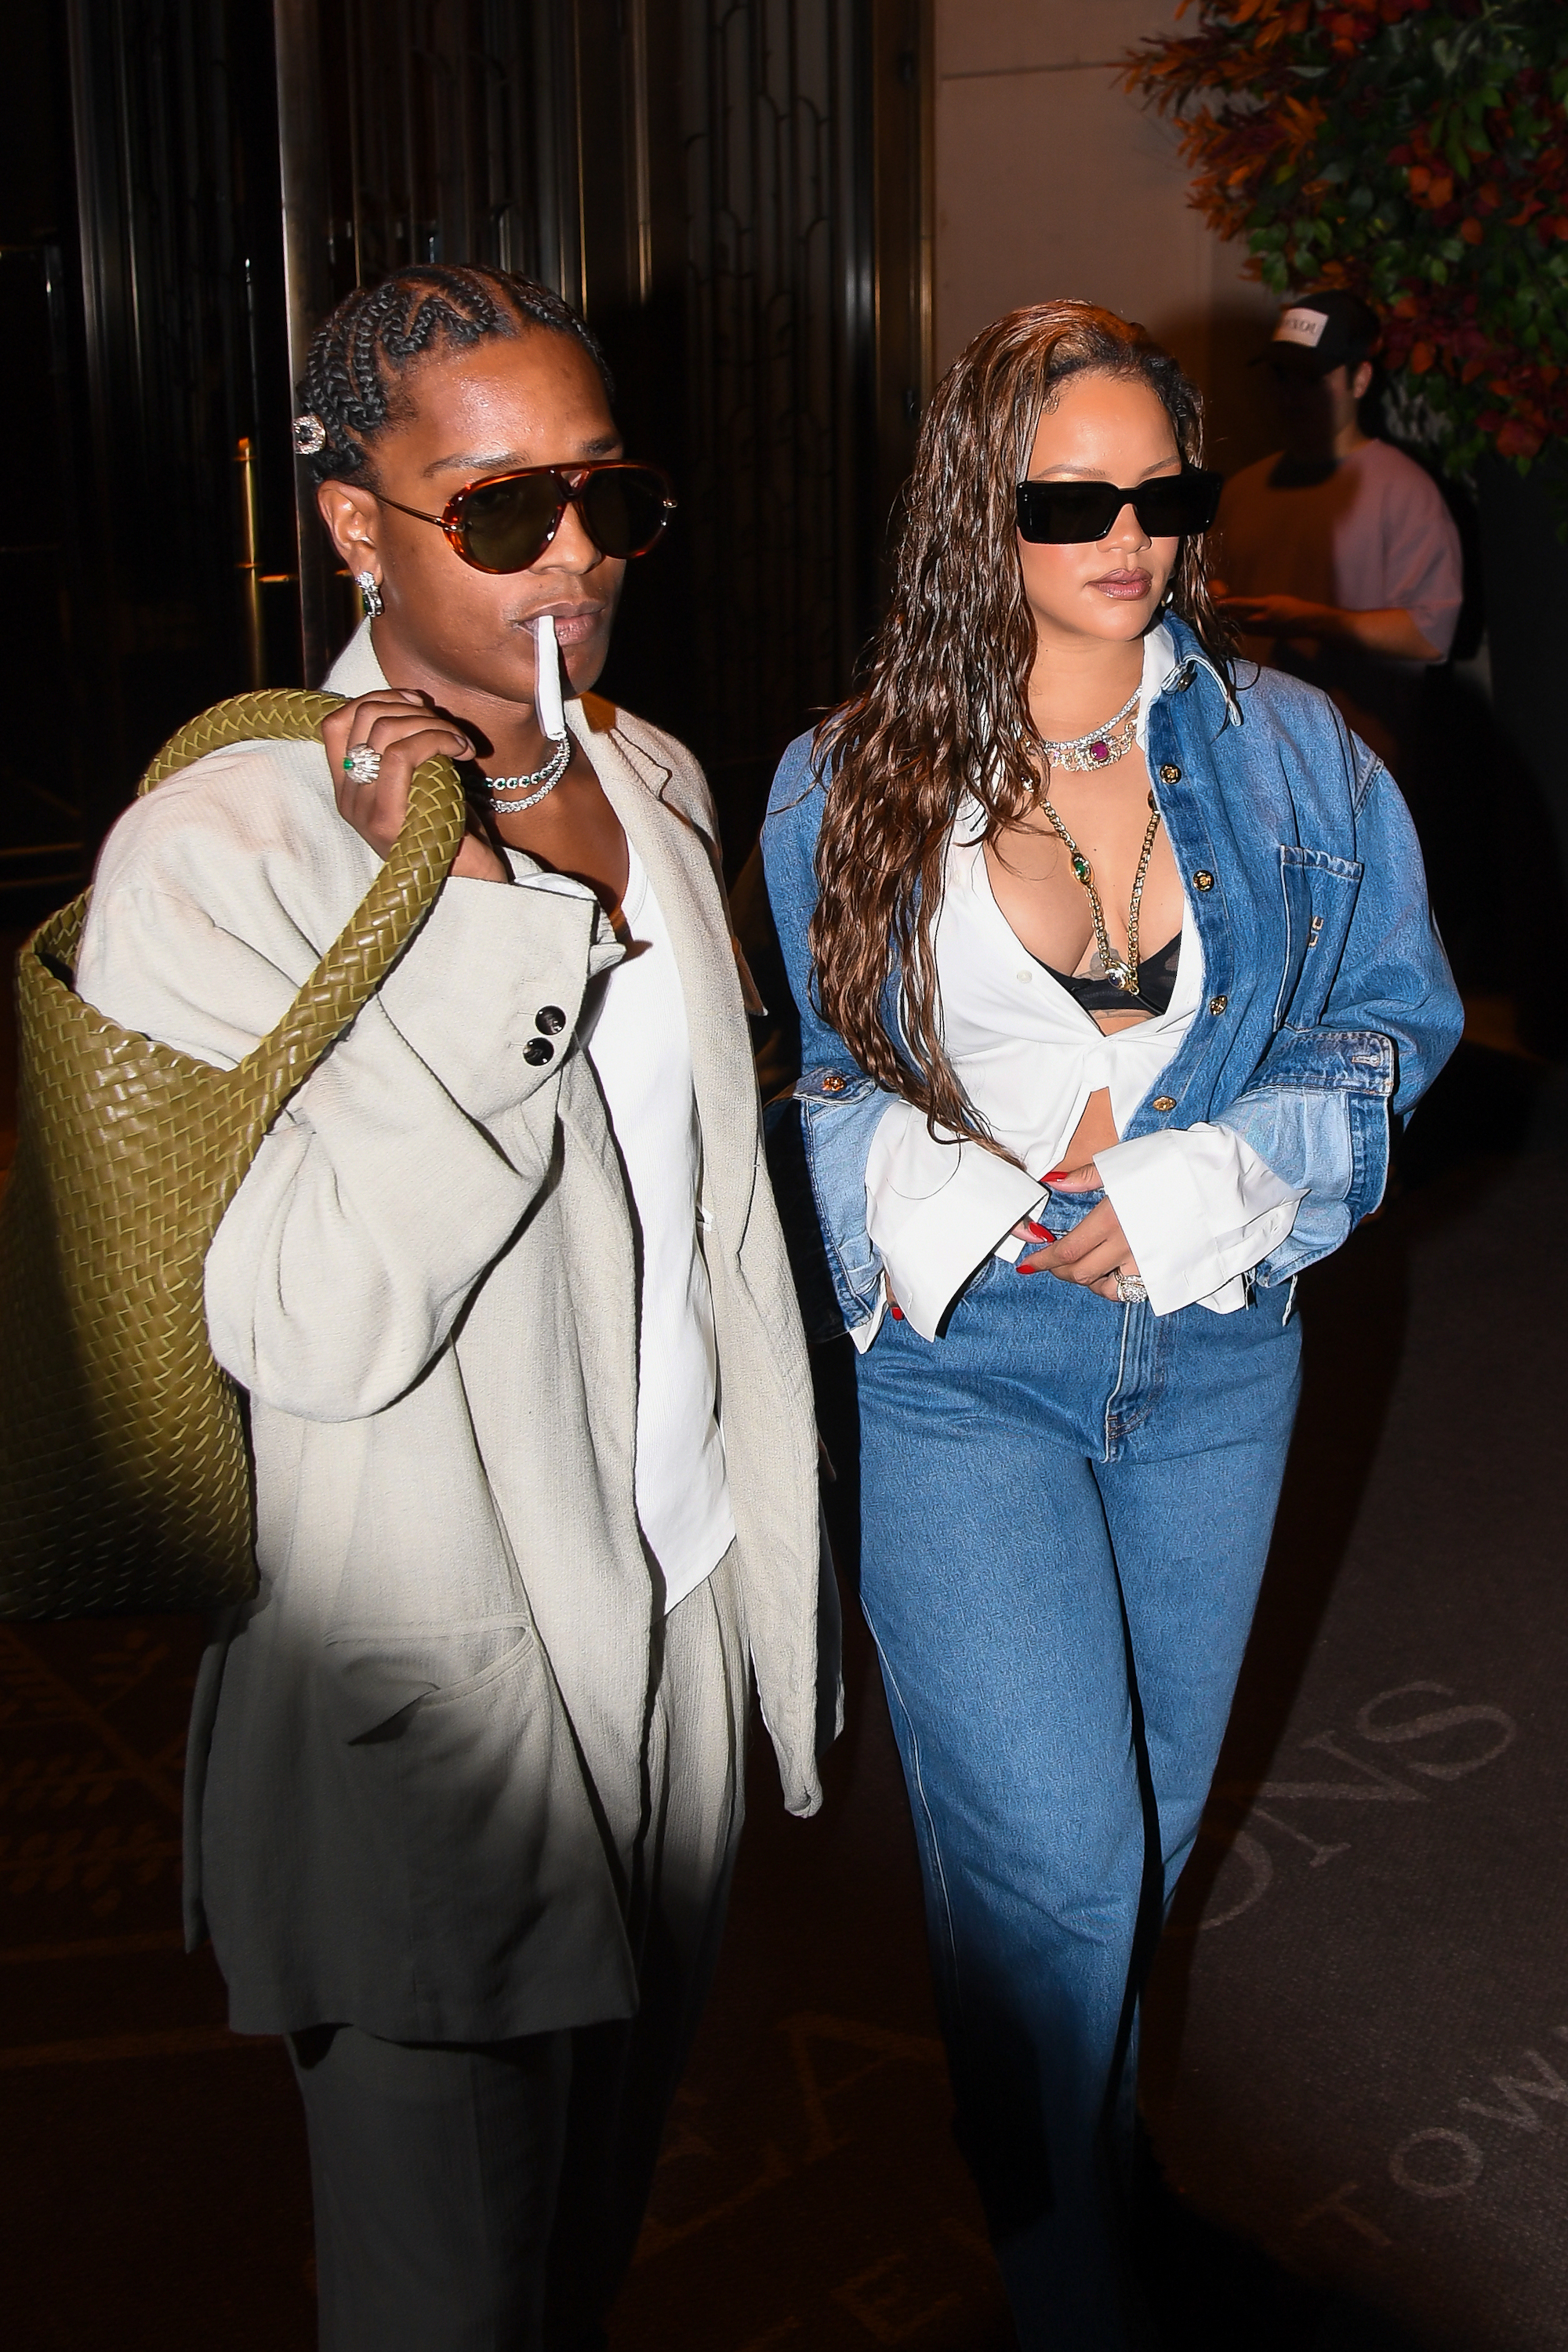 Rihanna and her boyfriend, rapper A$AP Rocky, shared two young sons - RZA and Riot